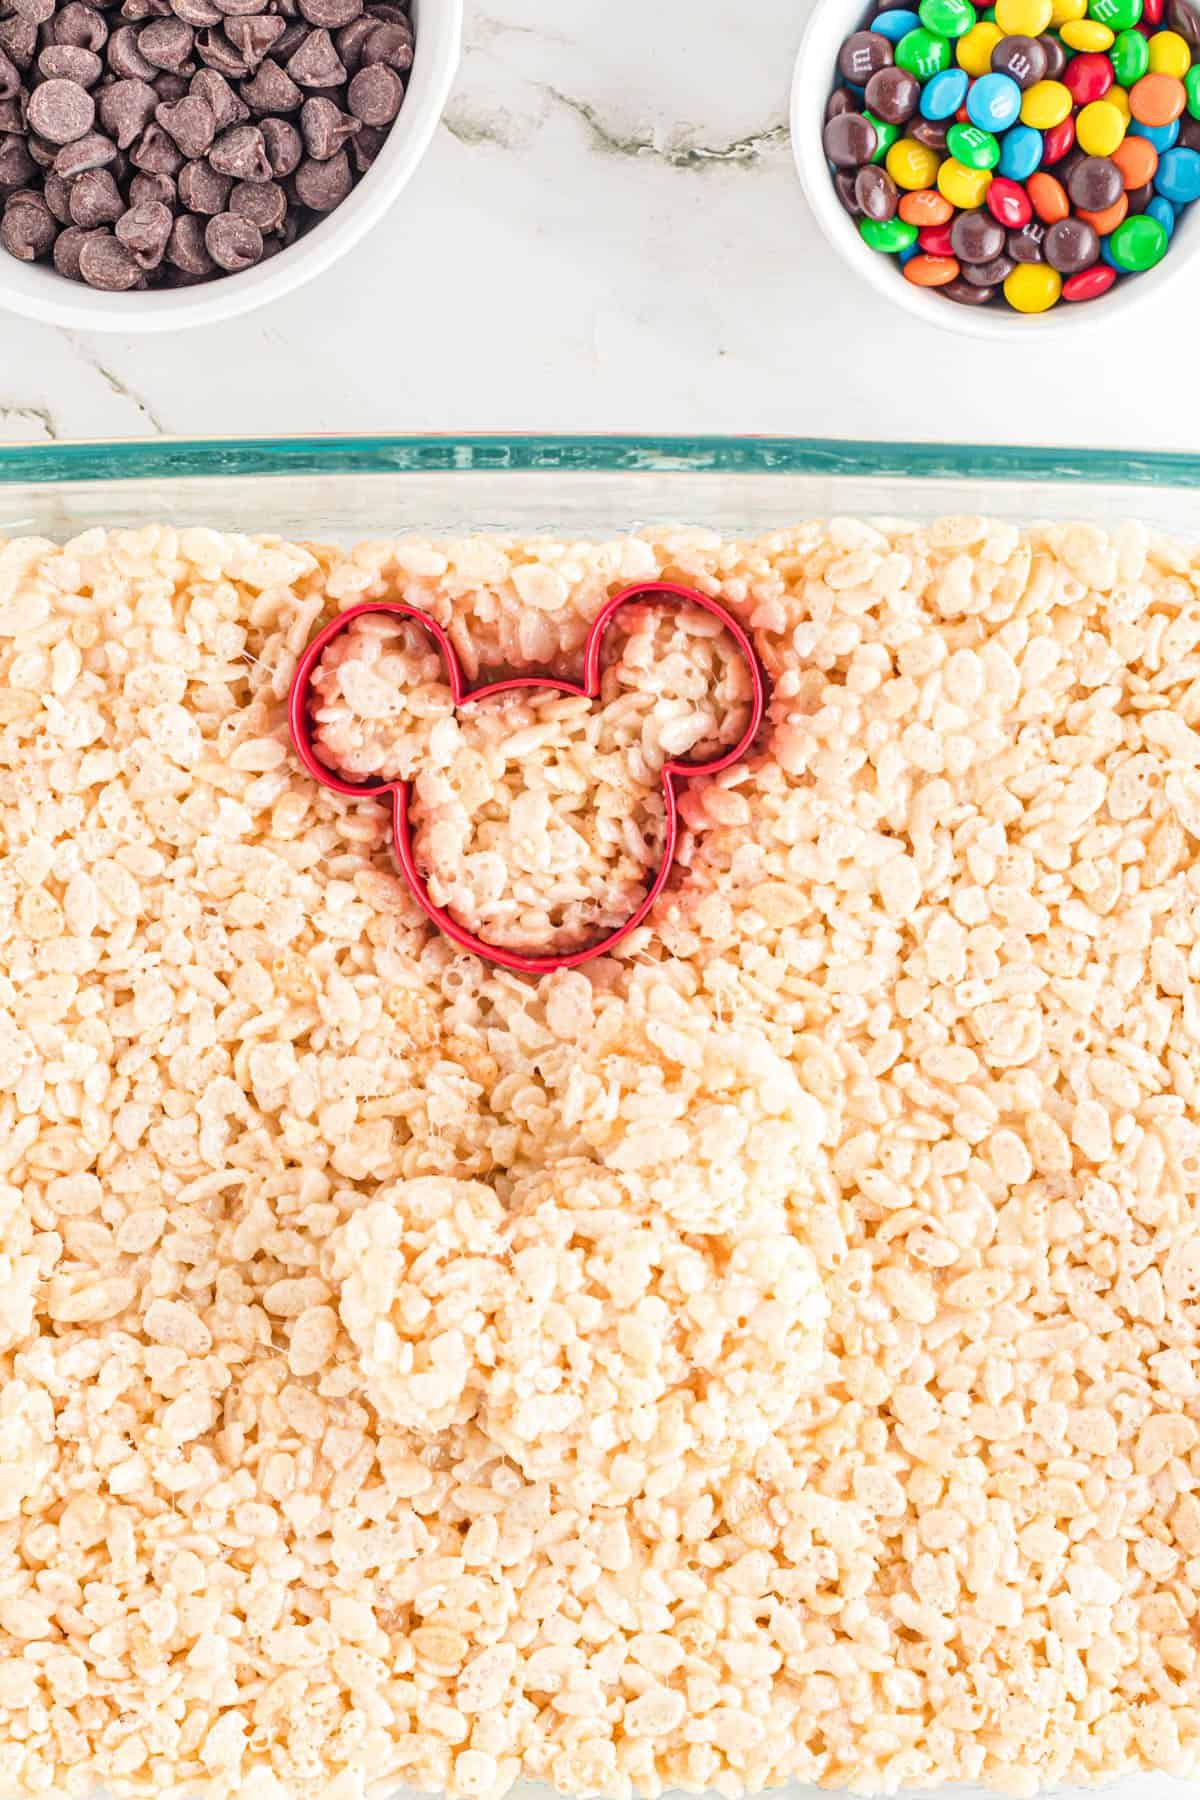 A red Mickey shaped cookie cutter being used to cut out Mickey rice krispies treats.